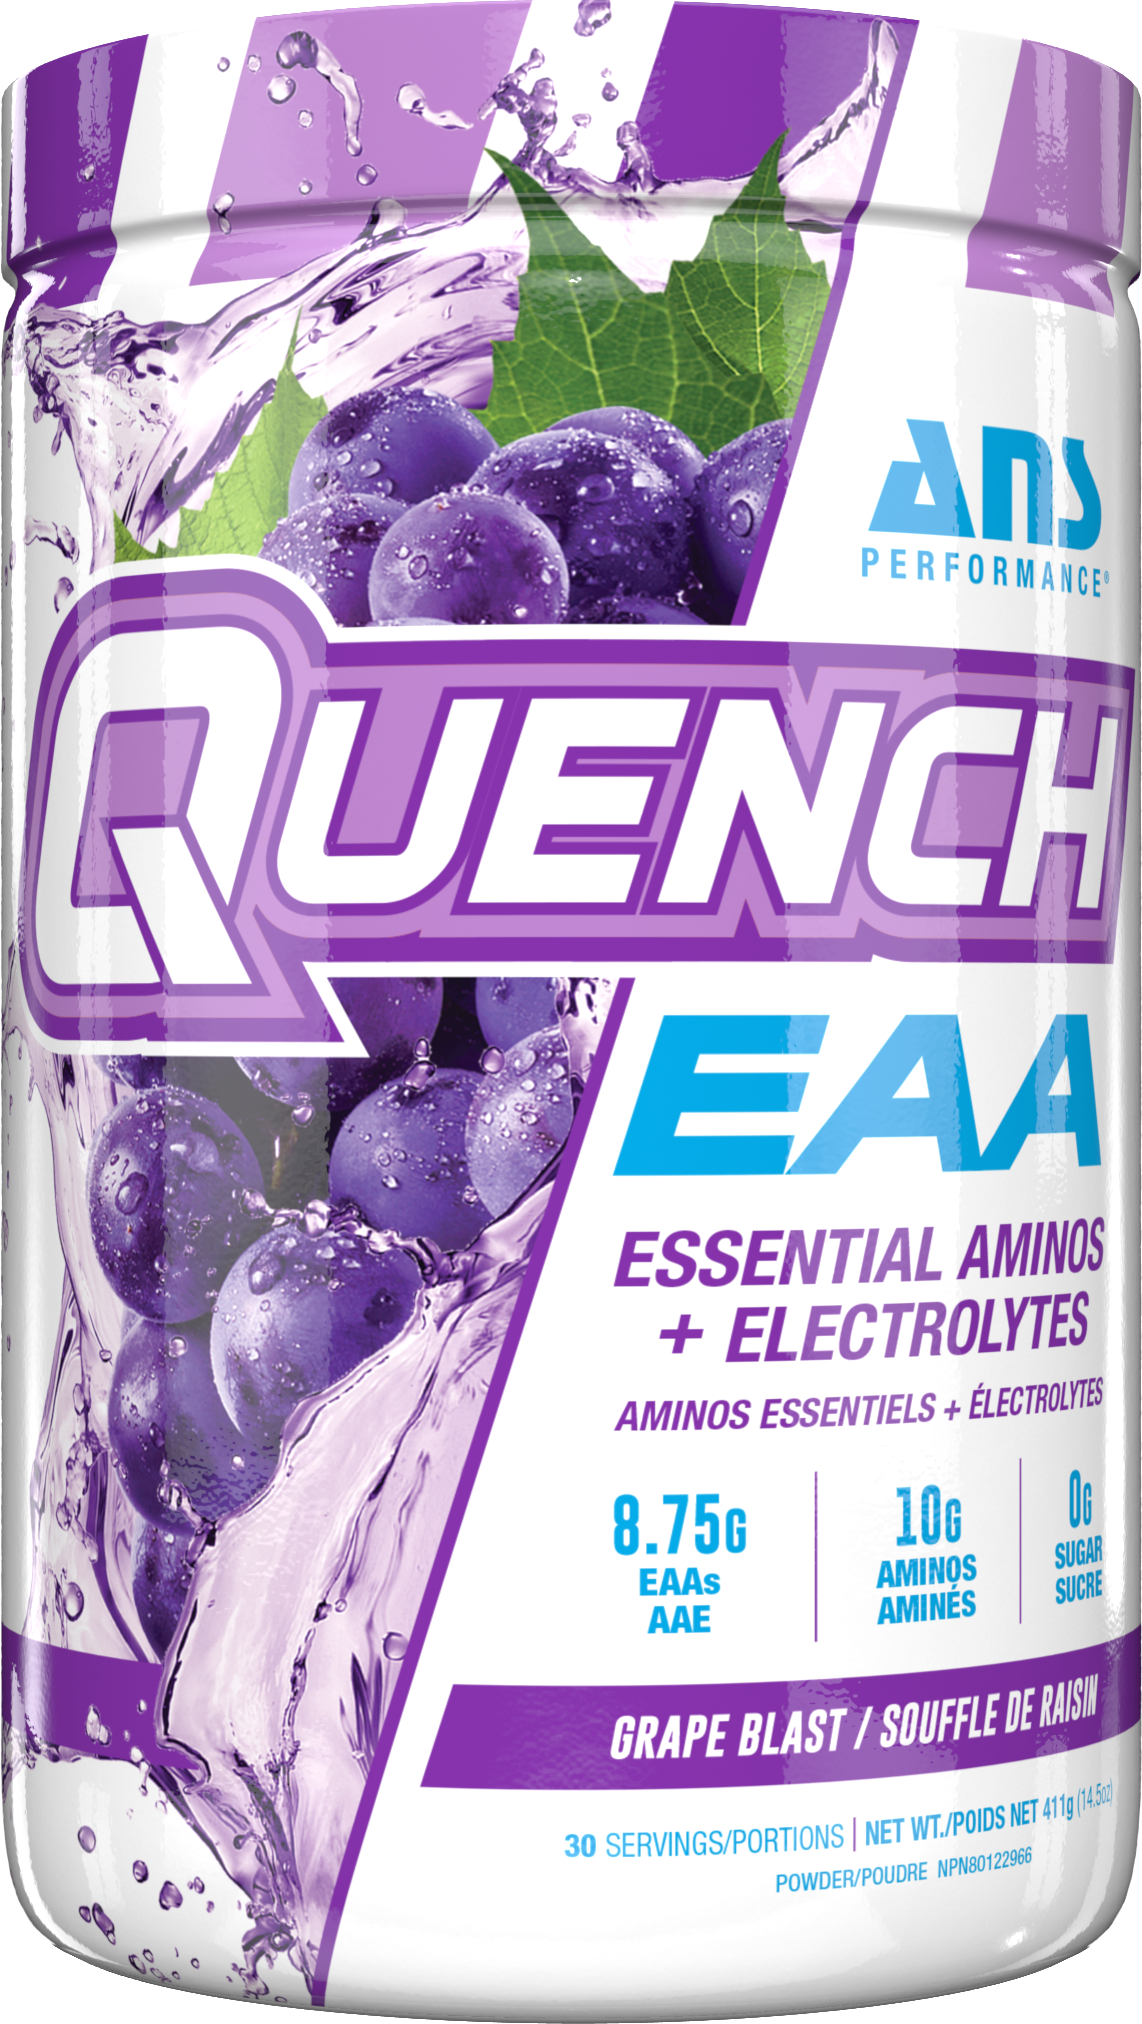 Ans Performance - Quench EAA Essentiel Amino Acid + Electrolytes - 30 serving